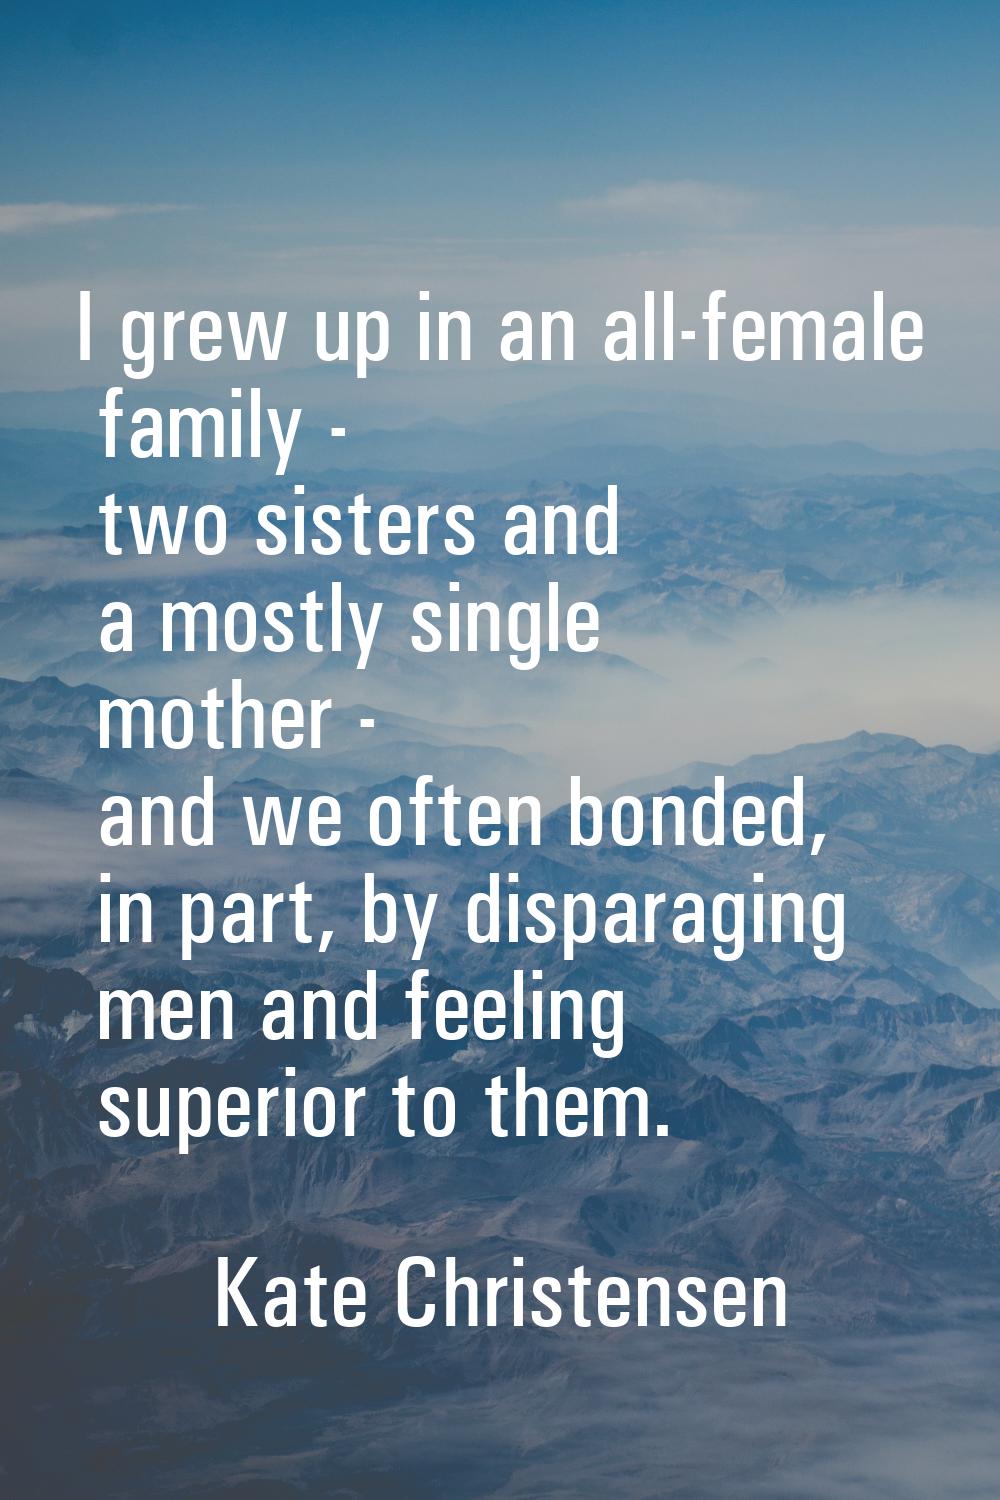 I grew up in an all-female family - two sisters and a mostly single mother - and we often bonded, i